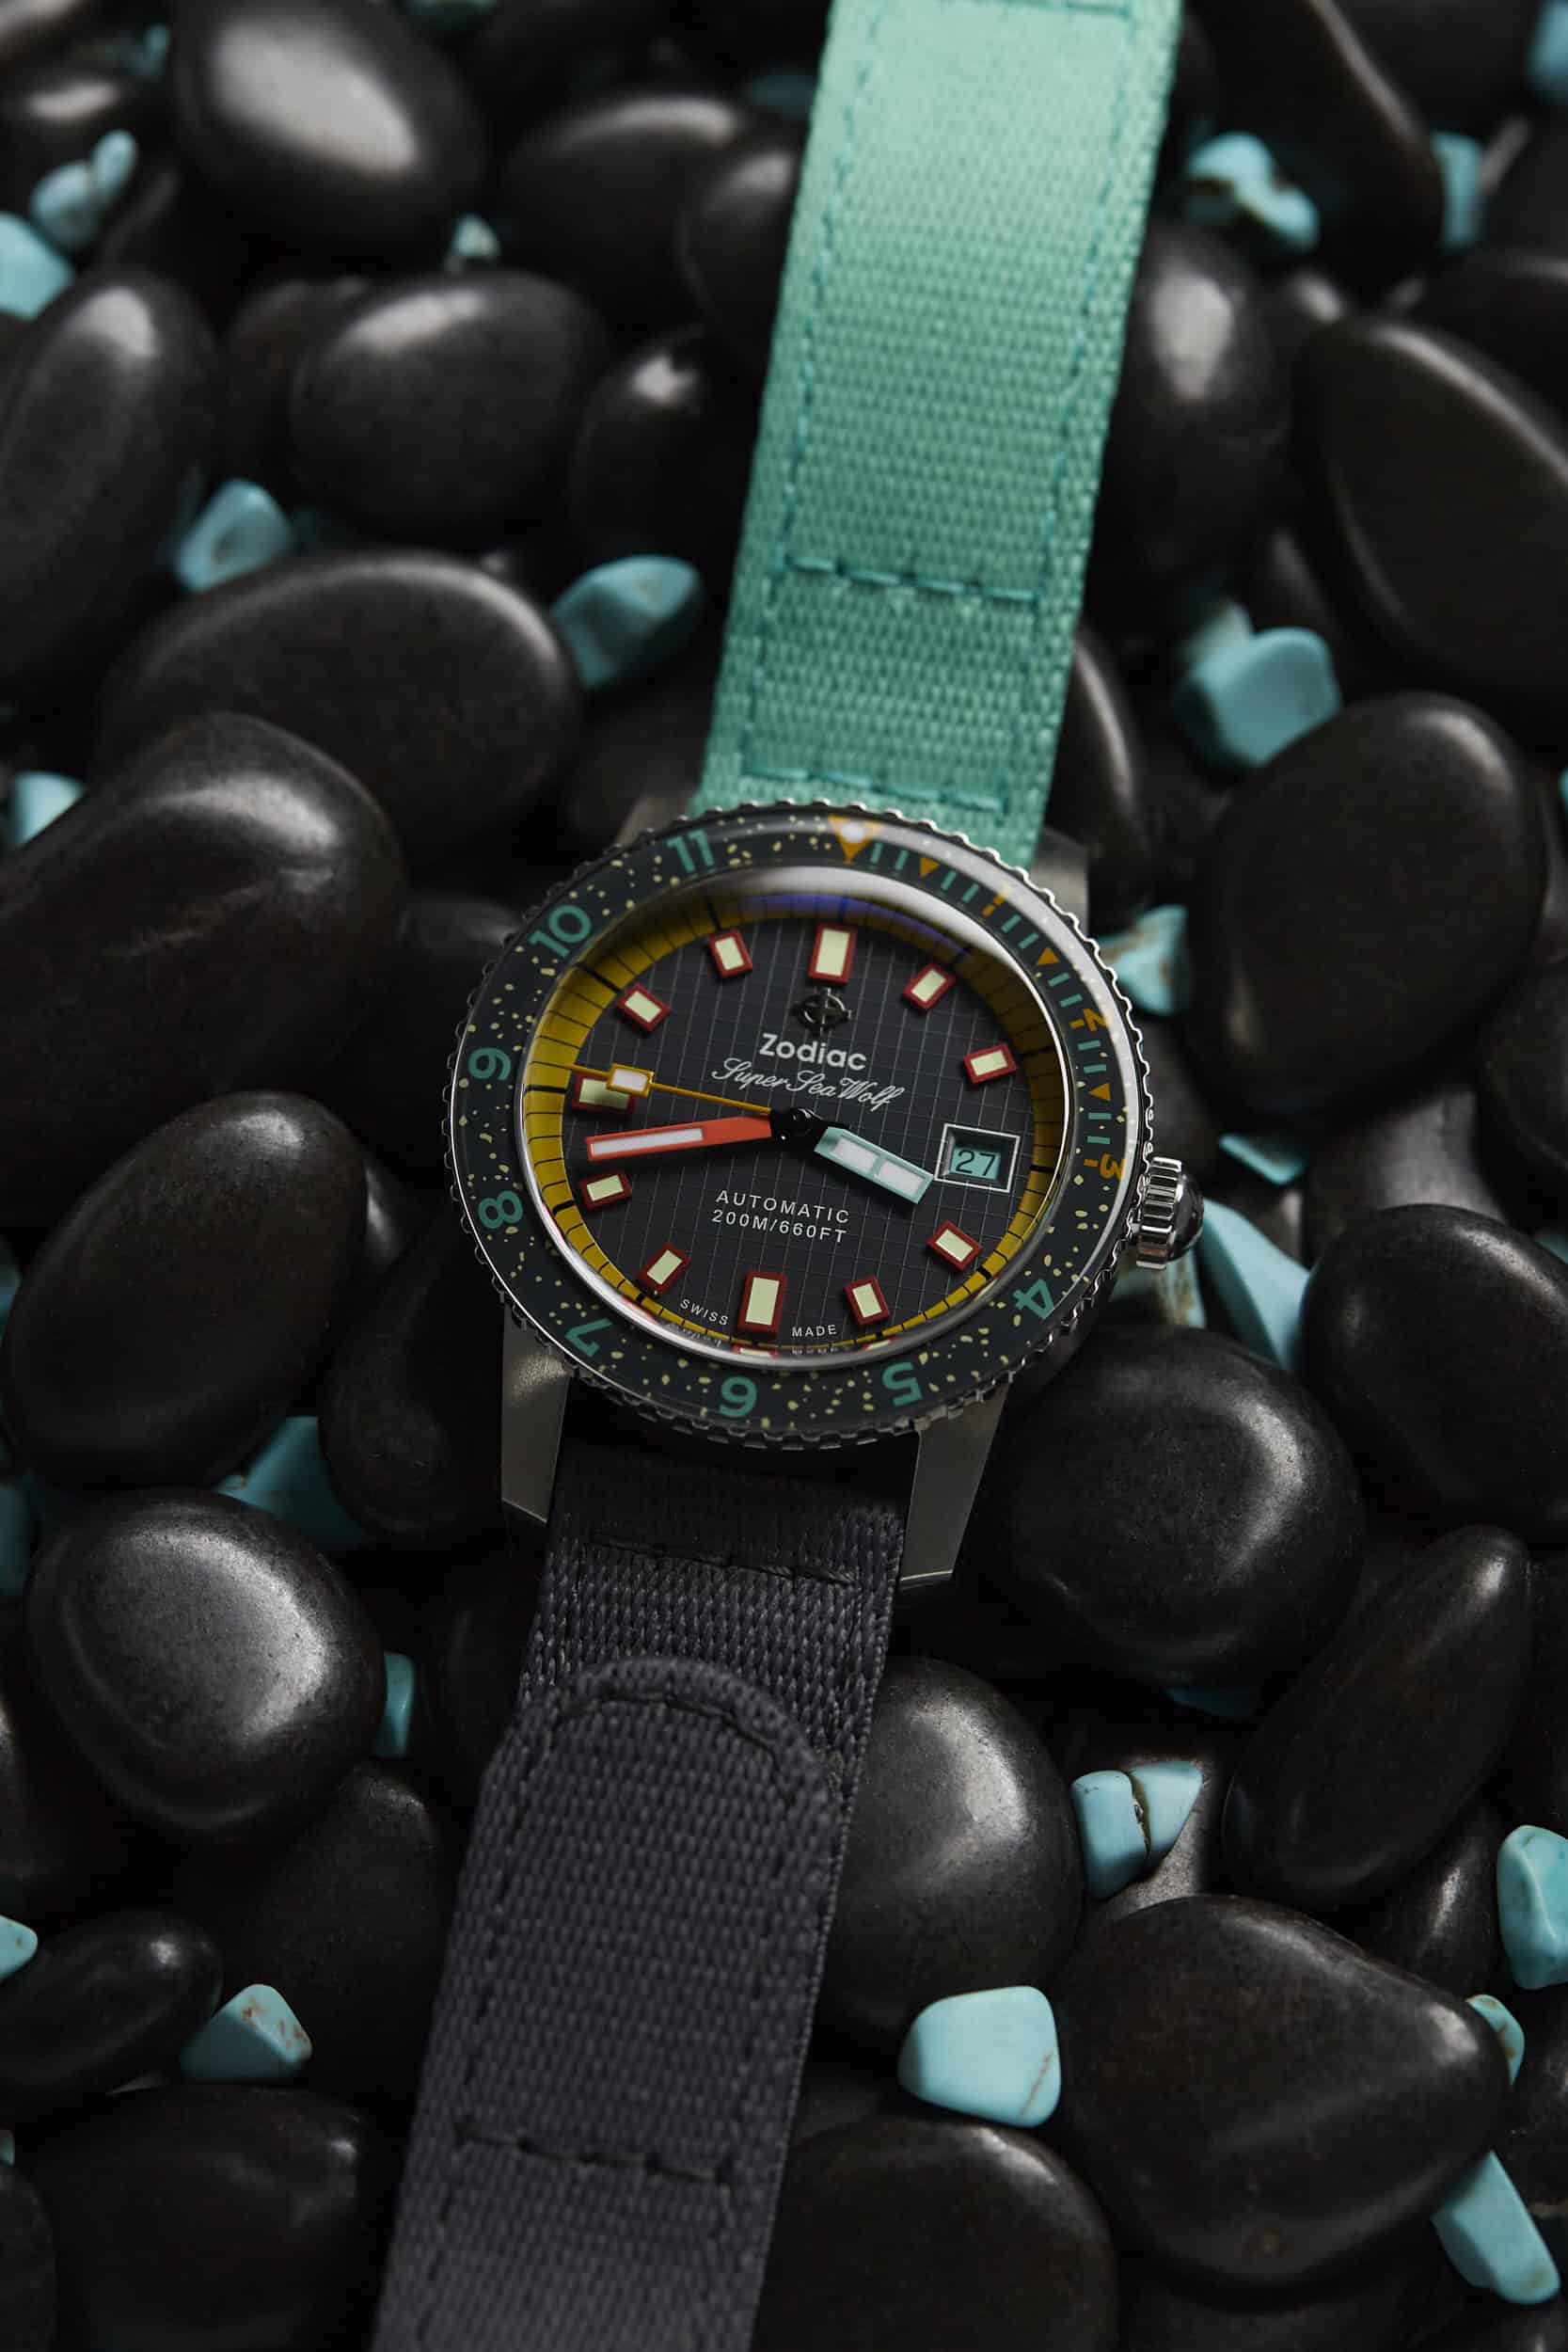 Introducing the Zodiac x Worn & Wound Super Sea Wolf Limited Edition ...